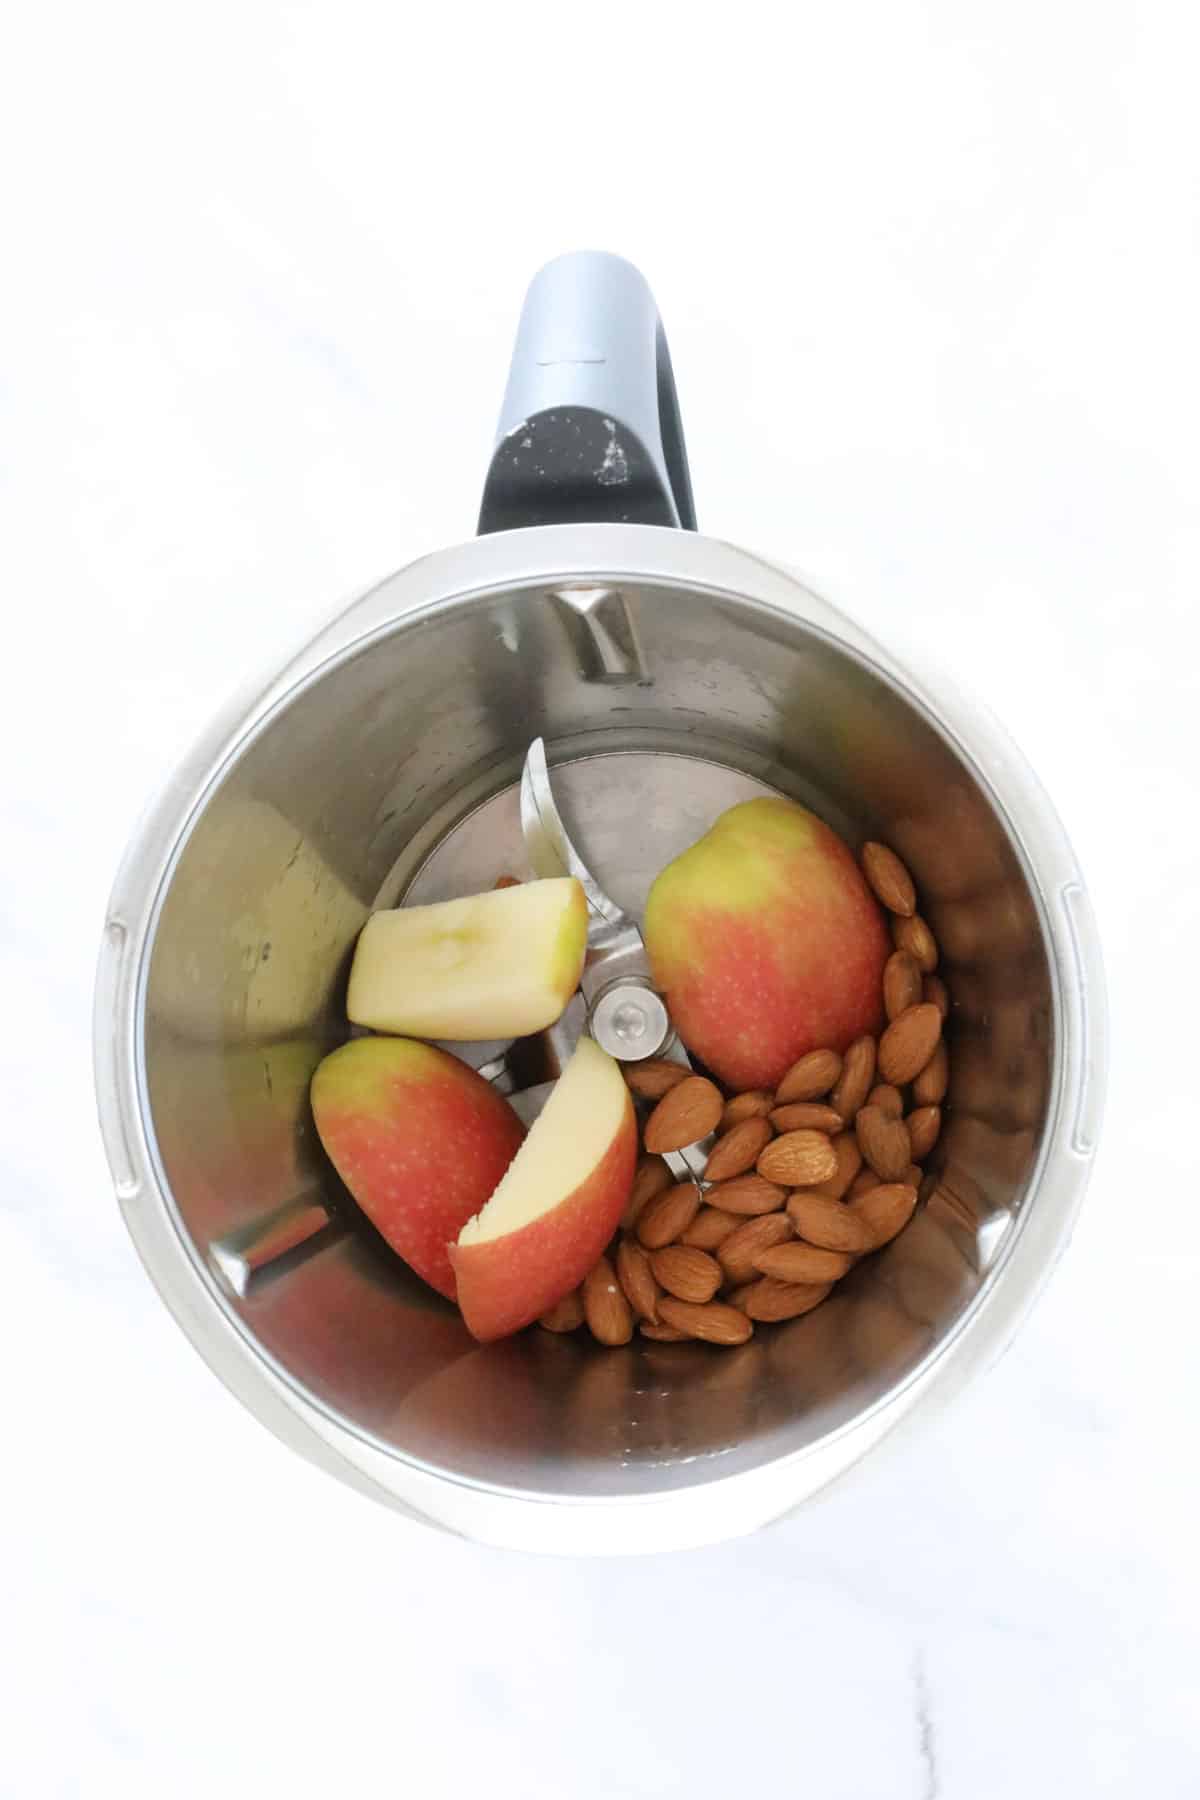 Apple and almonds in a Thermomix.